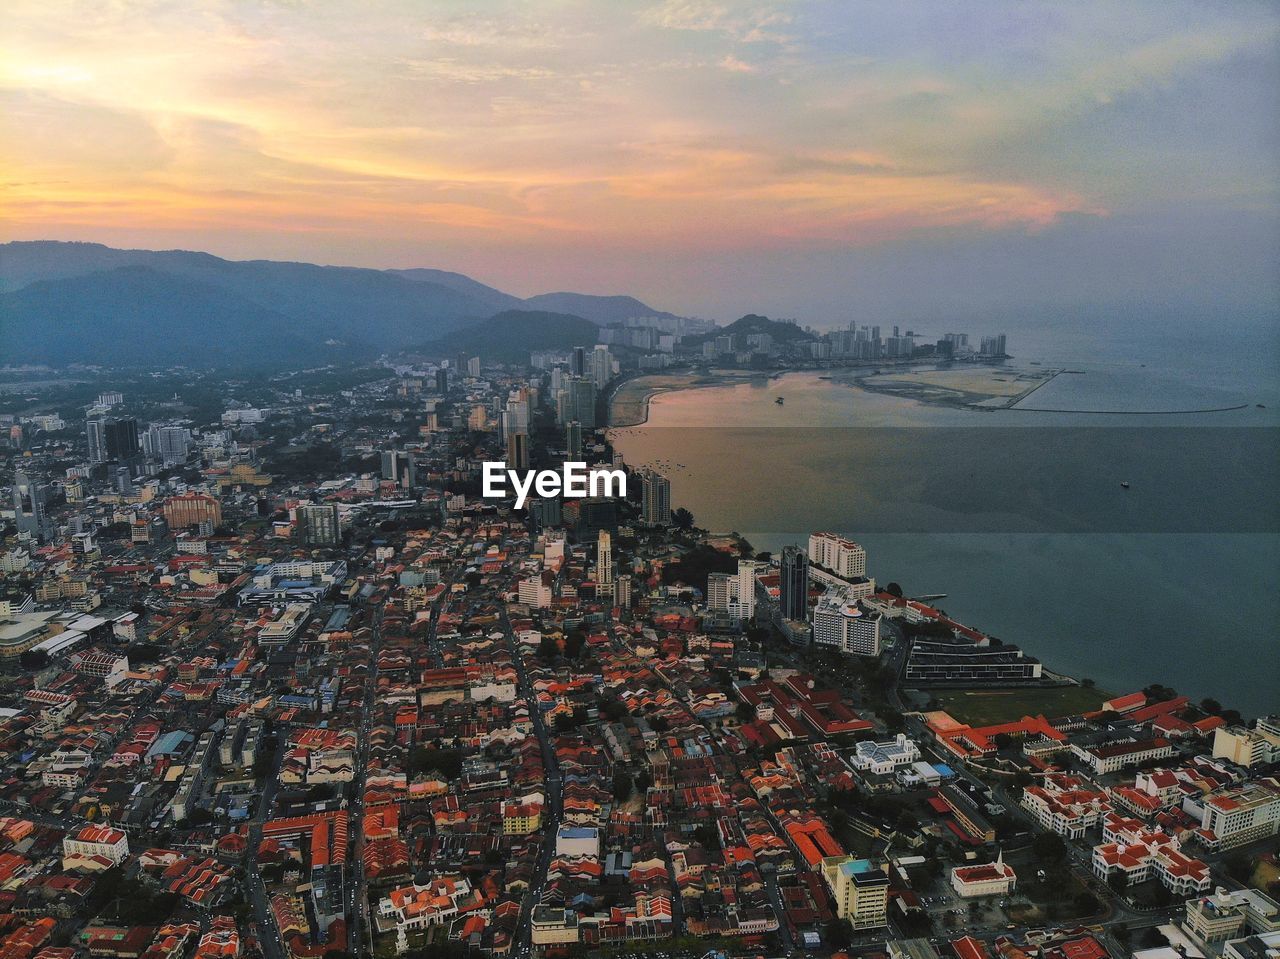 Aerial view of georgetown, penang malaysia